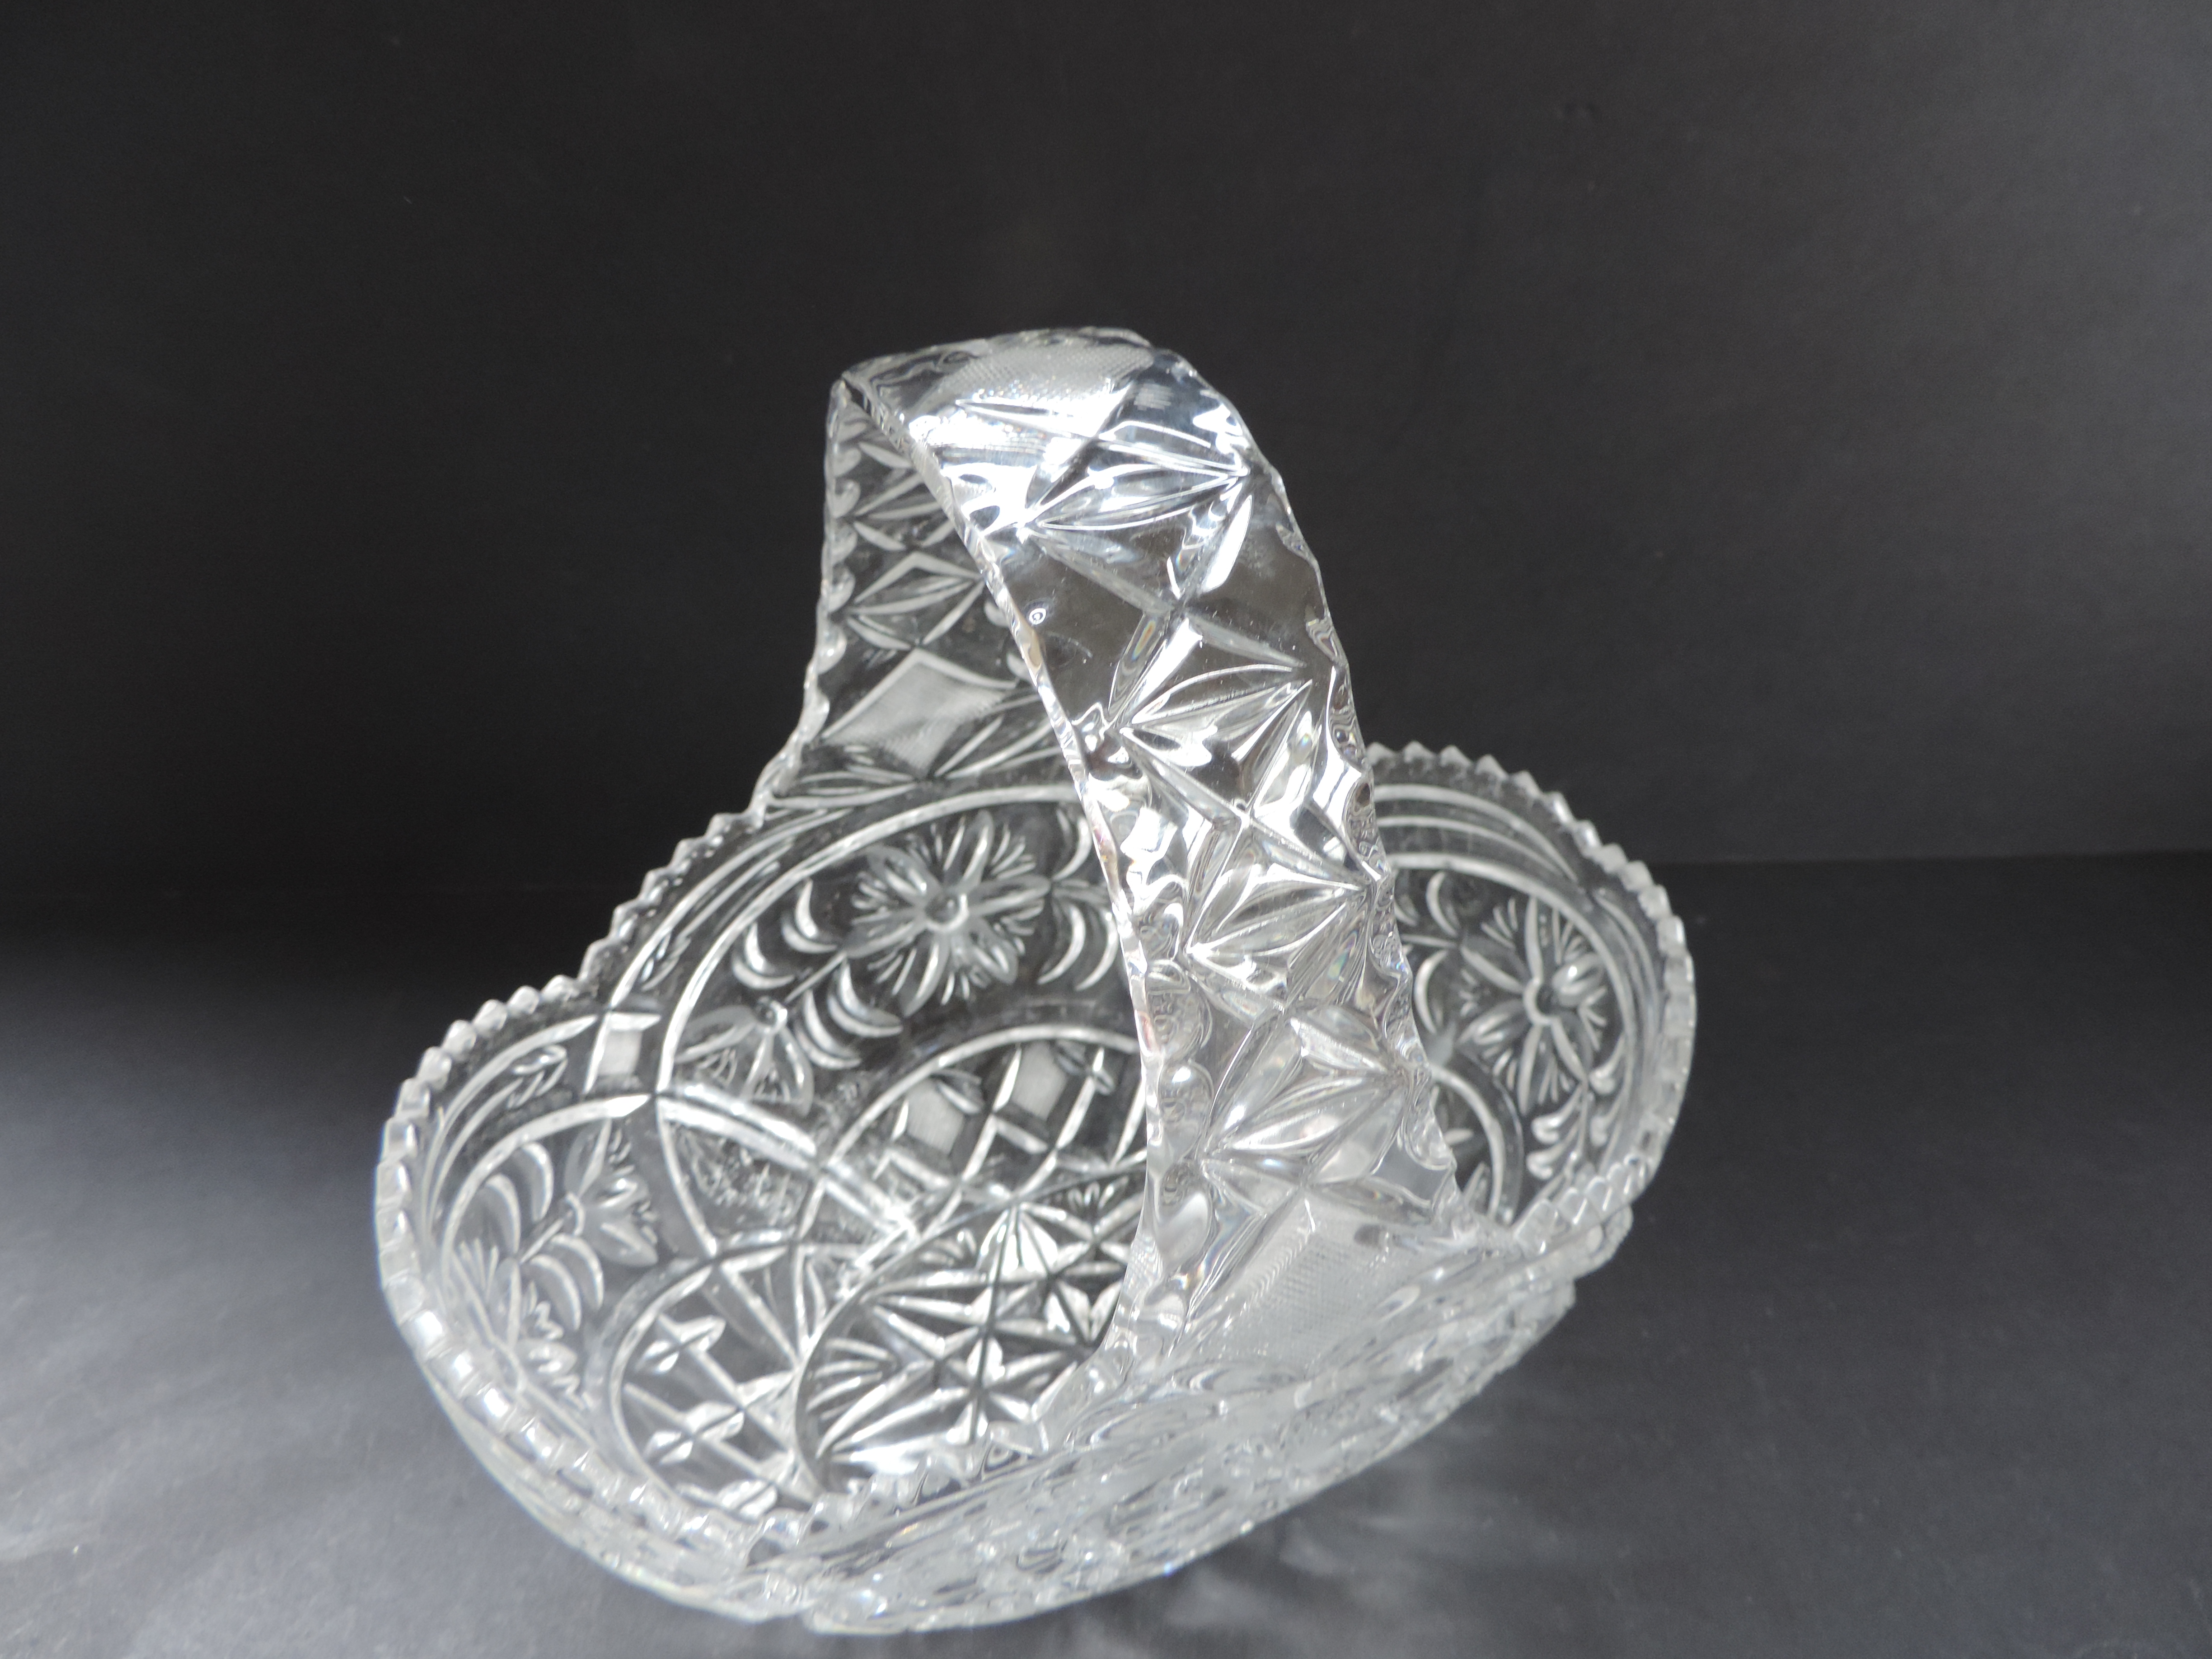 Vintage Crystal Basket for Sweets, Chocolates & Pastries - Image 3 of 3